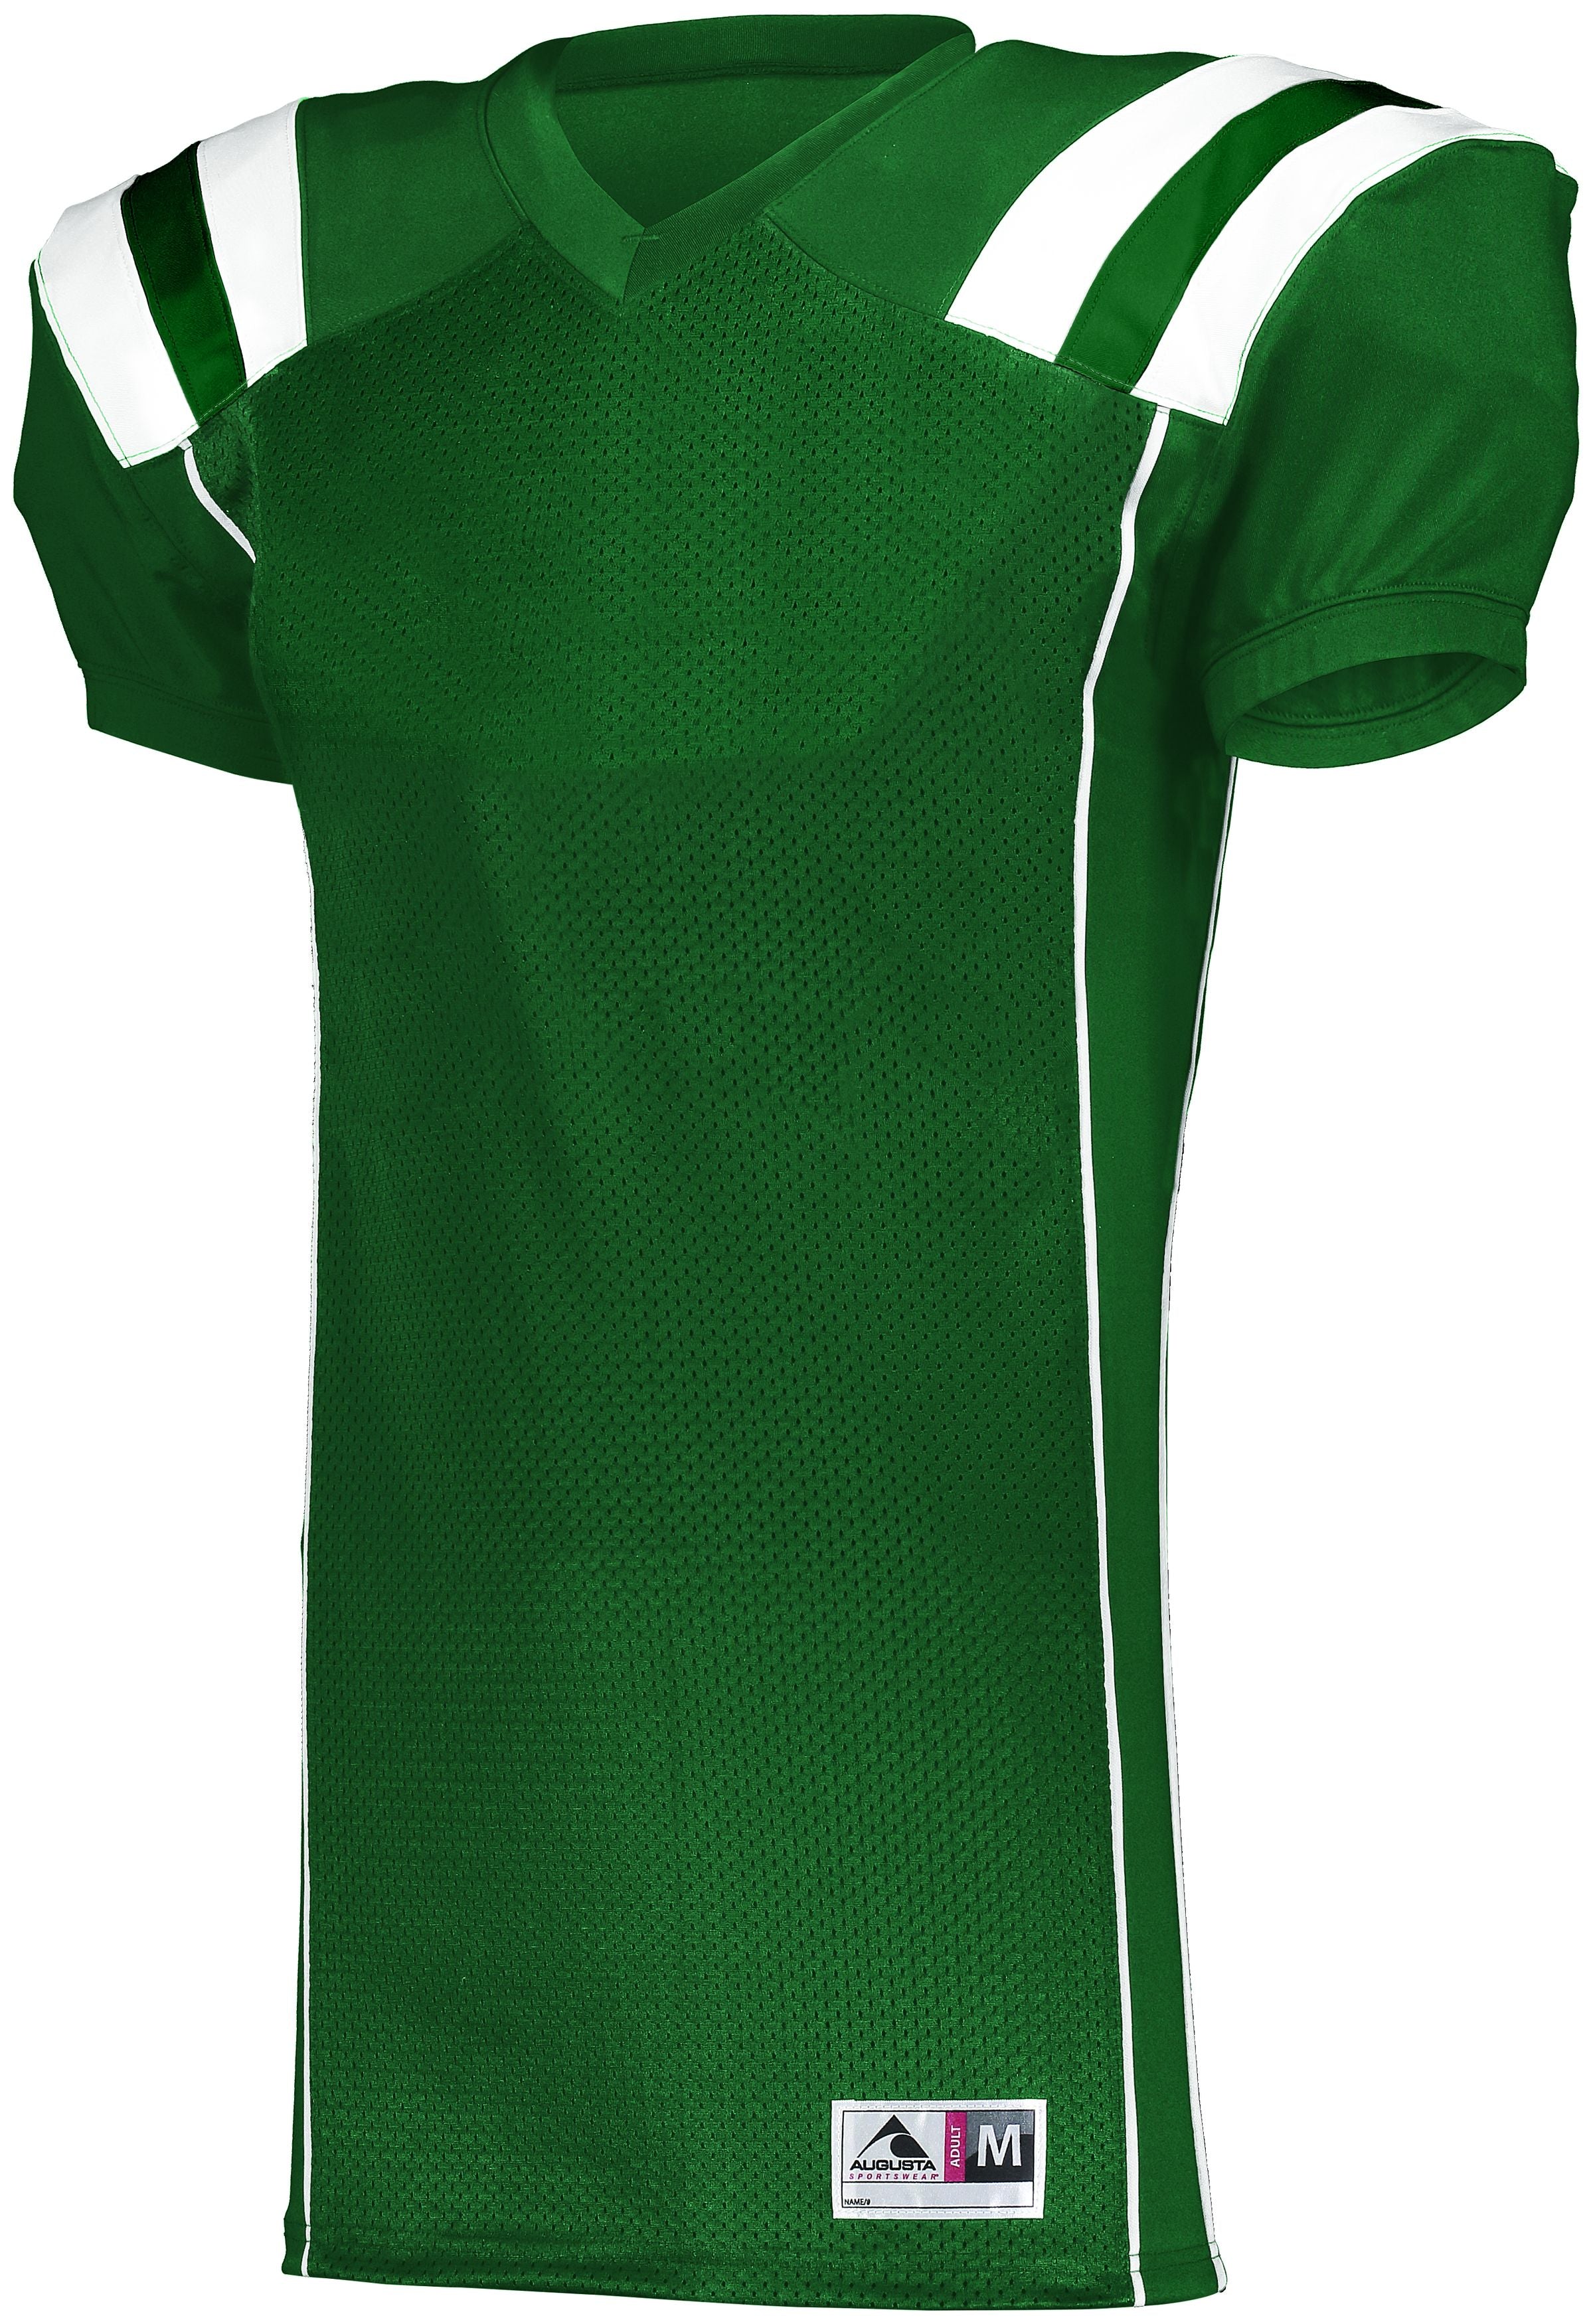 Augusta Sportswear Youth Tform Football Jersey in Dark Green/White  -Part of the Youth, Youth-Jersey, Augusta-Products, Football, Shirts, All-Sports, All-Sports-1 product lines at KanaleyCreations.com